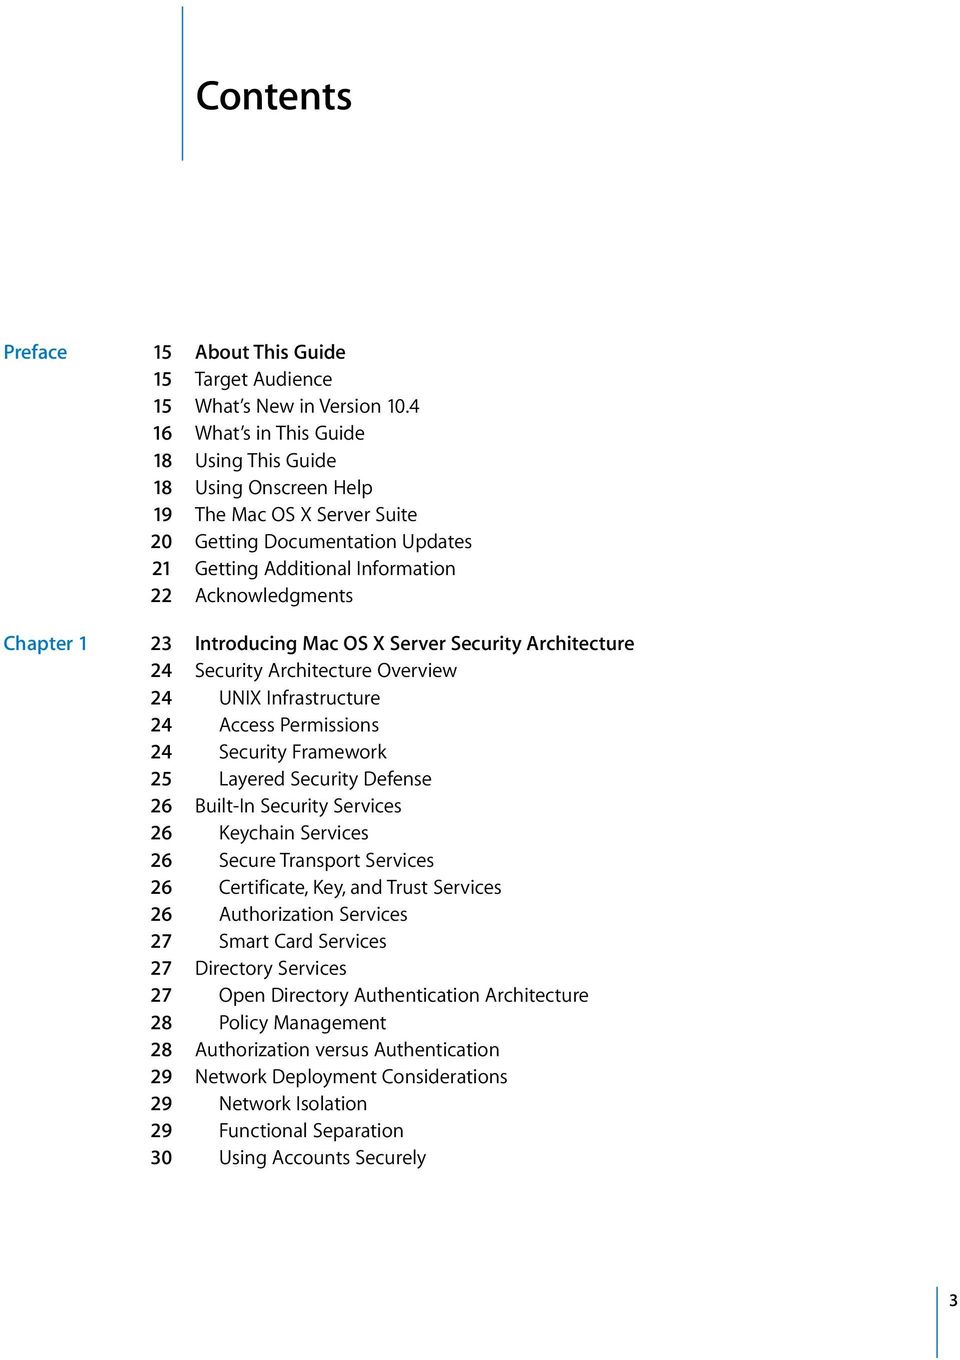 Introducing Mac OS X Server Security Architecture 24 Security Architecture Overview 24 UNIX Infrastructure 24 Access Permissions 24 Security Framework 25 Layered Security Defense 26 Built-In Security